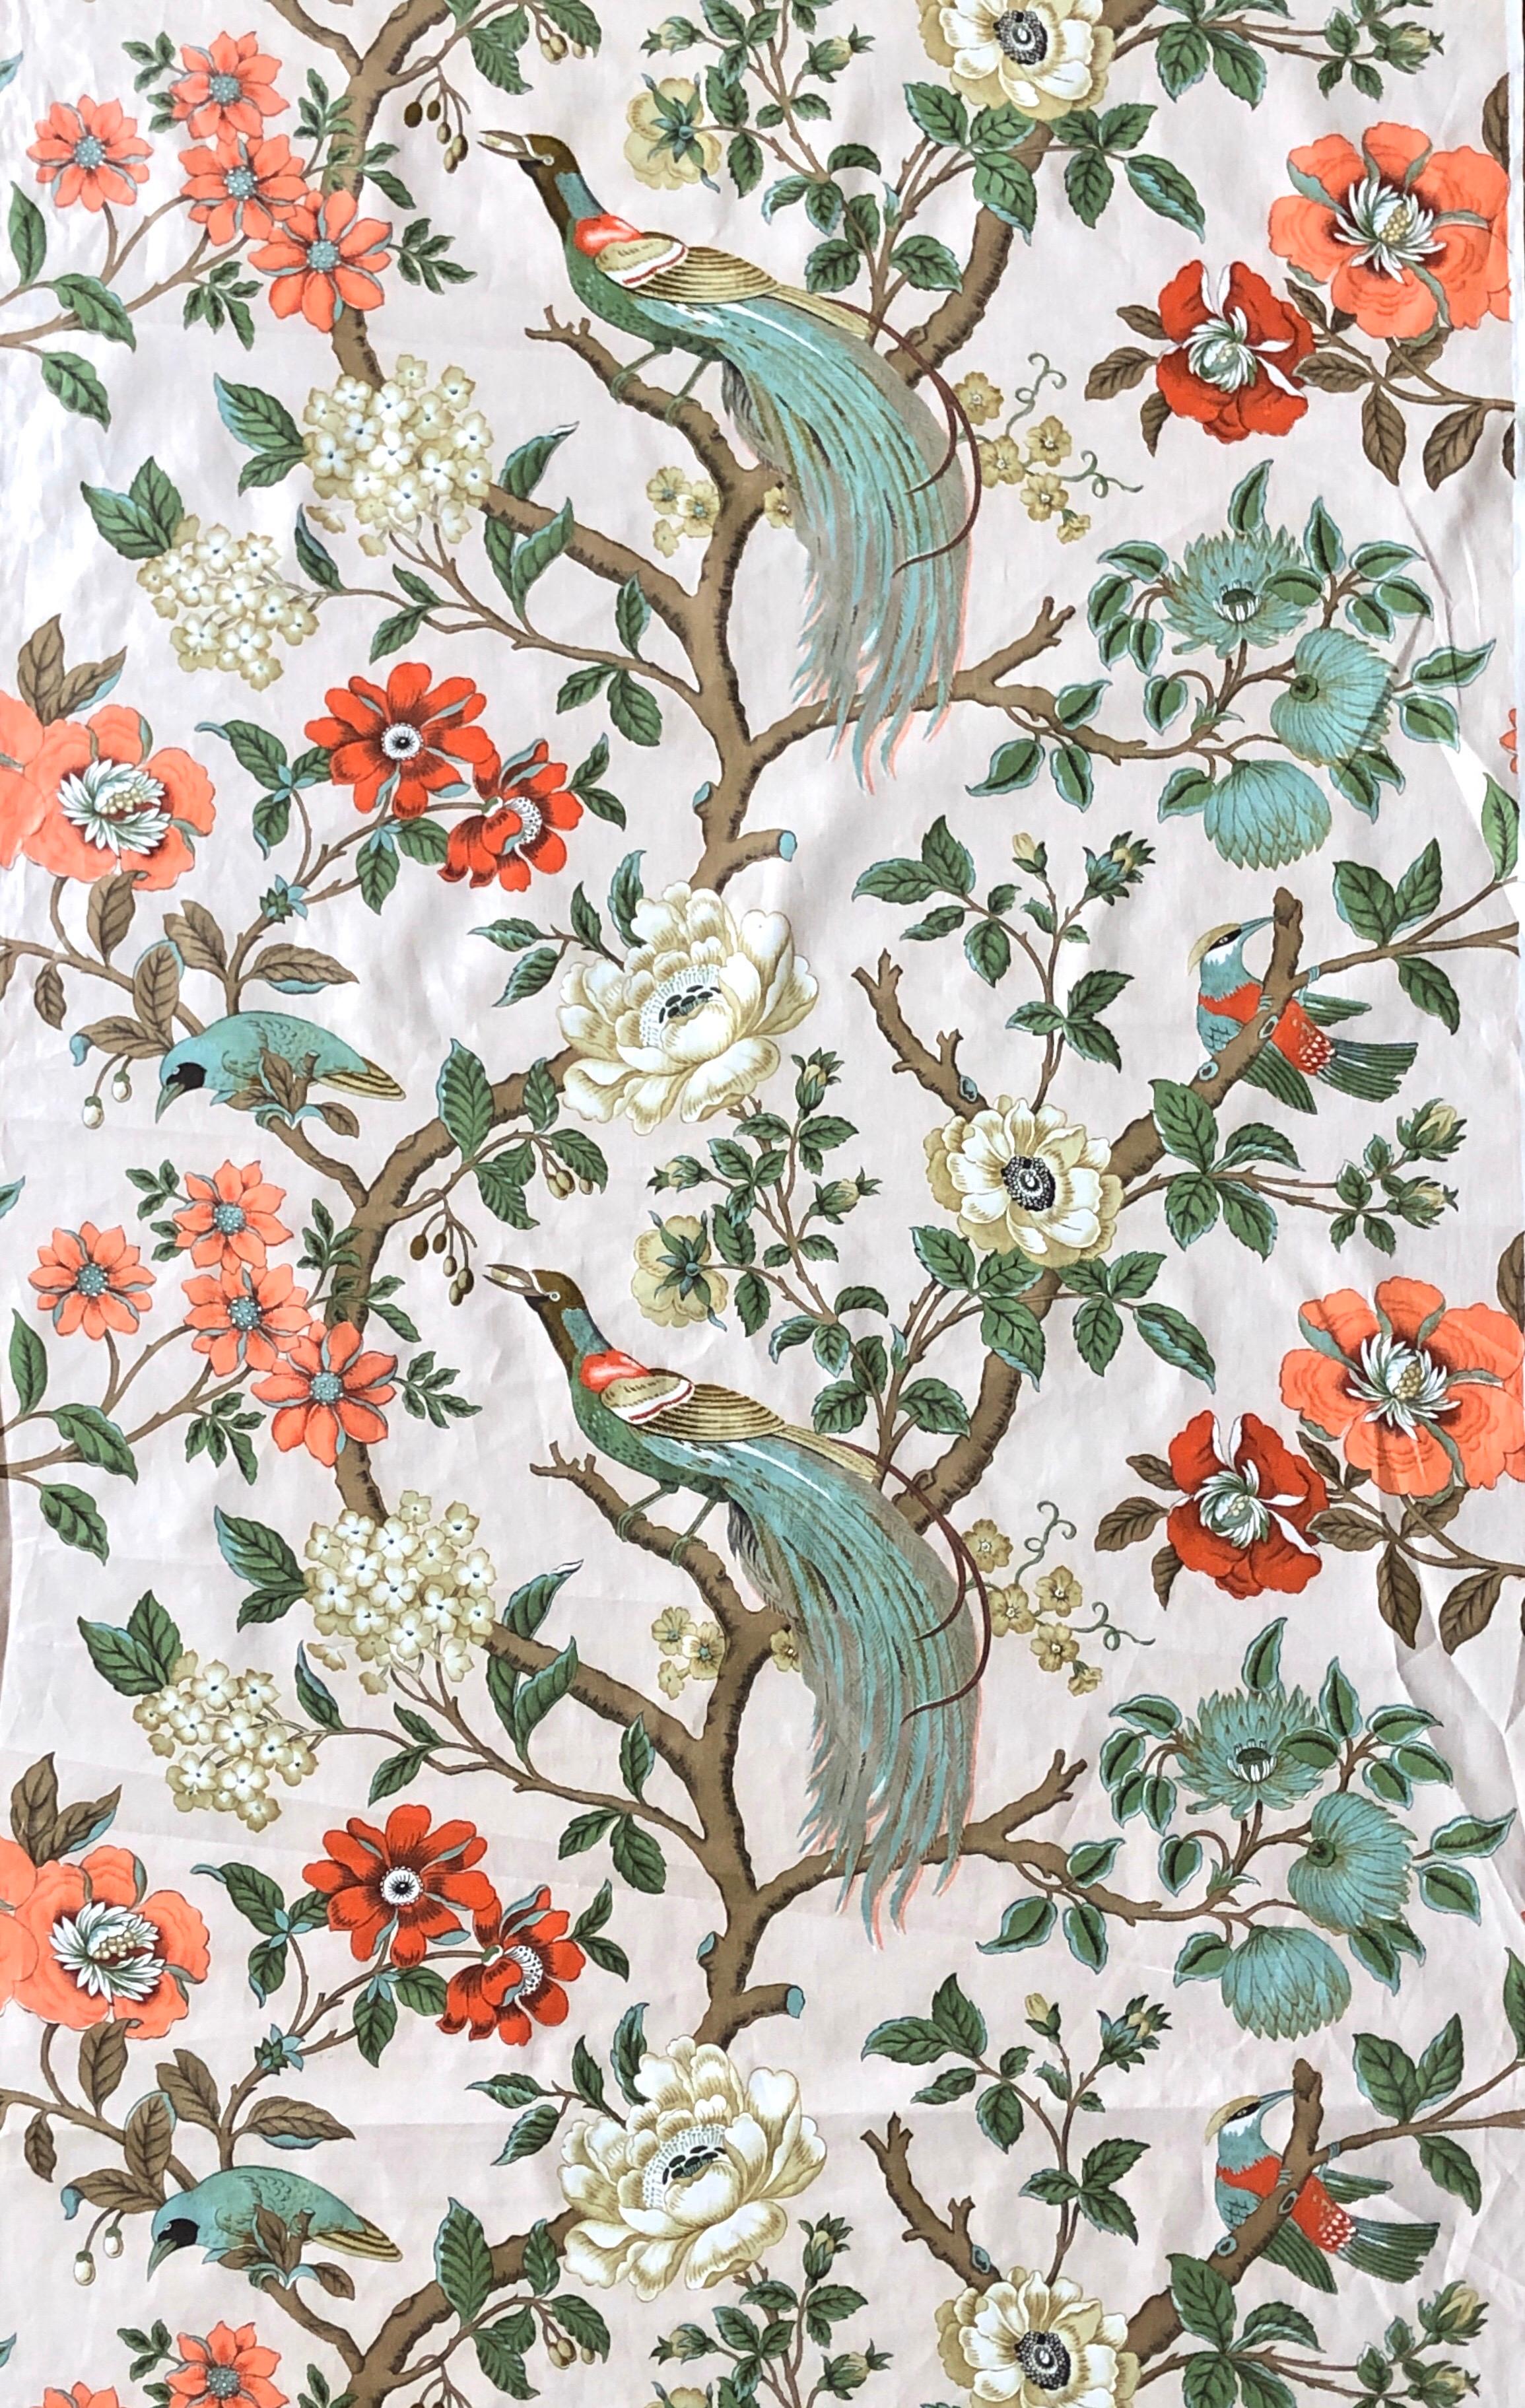 French fabric made of silk and cotton with waxed surface decorated with flowers and birds. A colorful and elegant piece in very good condition.
France, circa 1970.
Size: 470 per 80 cm. (185 per 31.5 in).
    